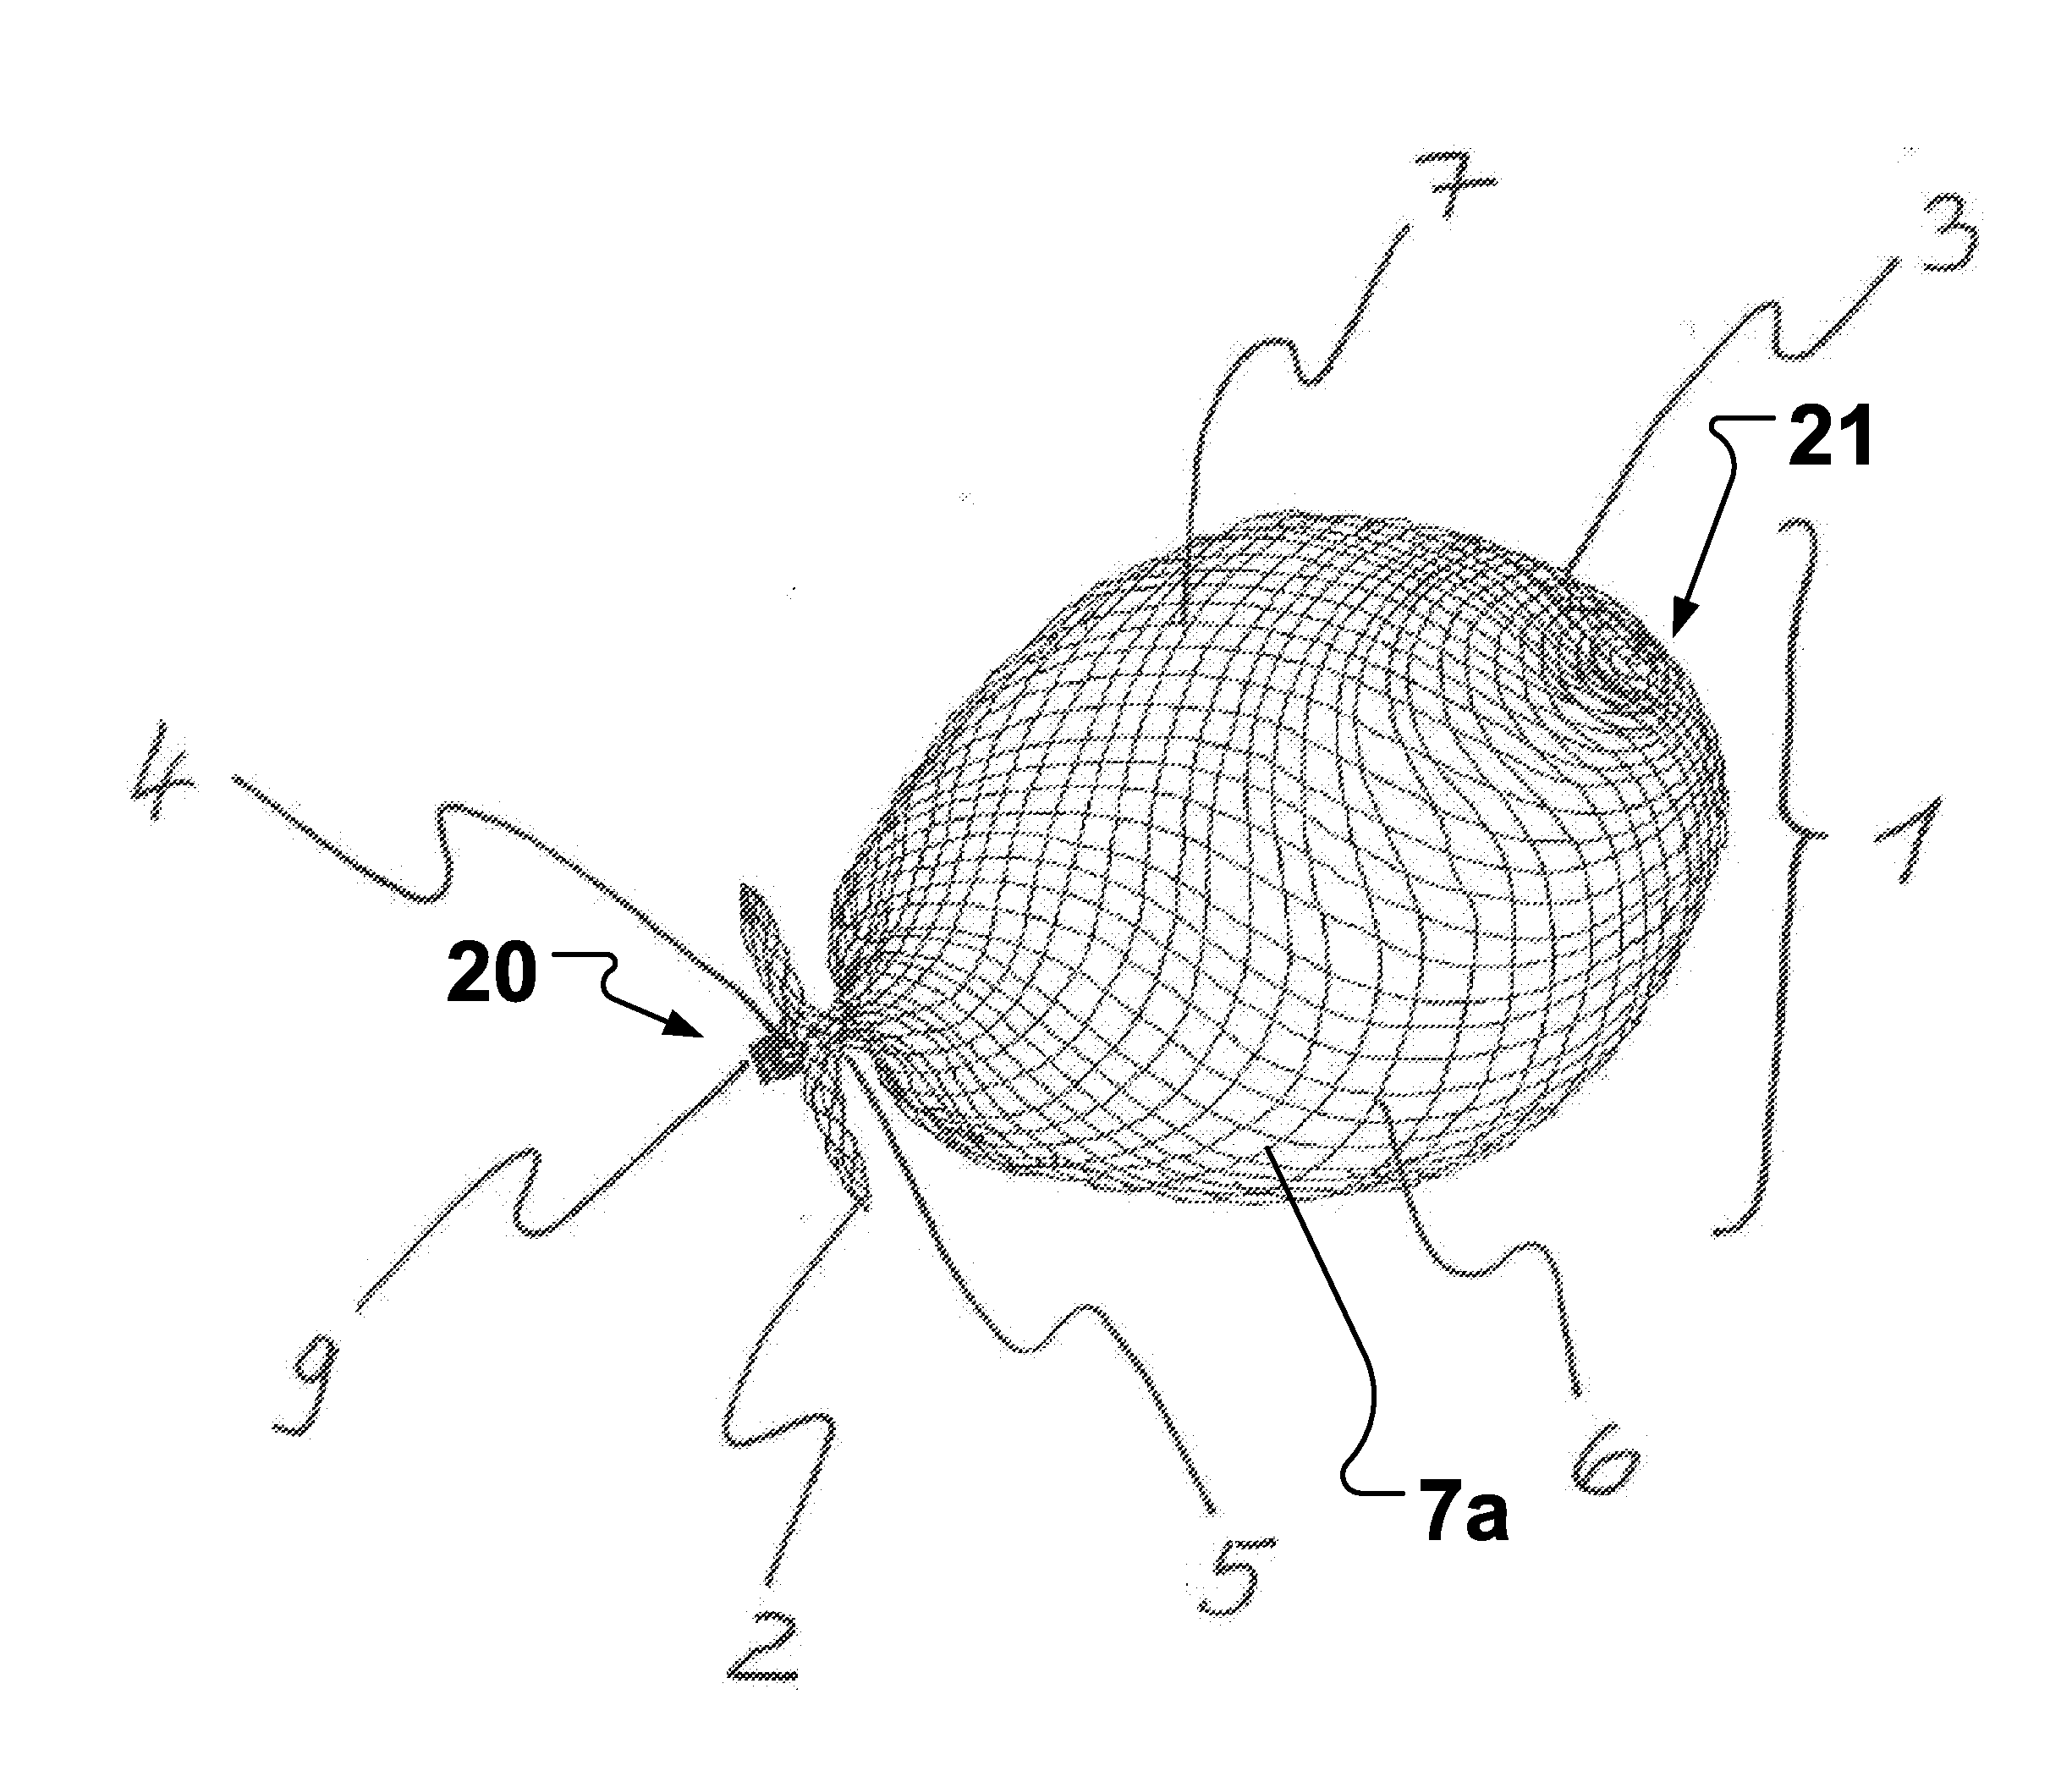 Occluder For Occluding an Atrial Appendage and Production Process Therefor